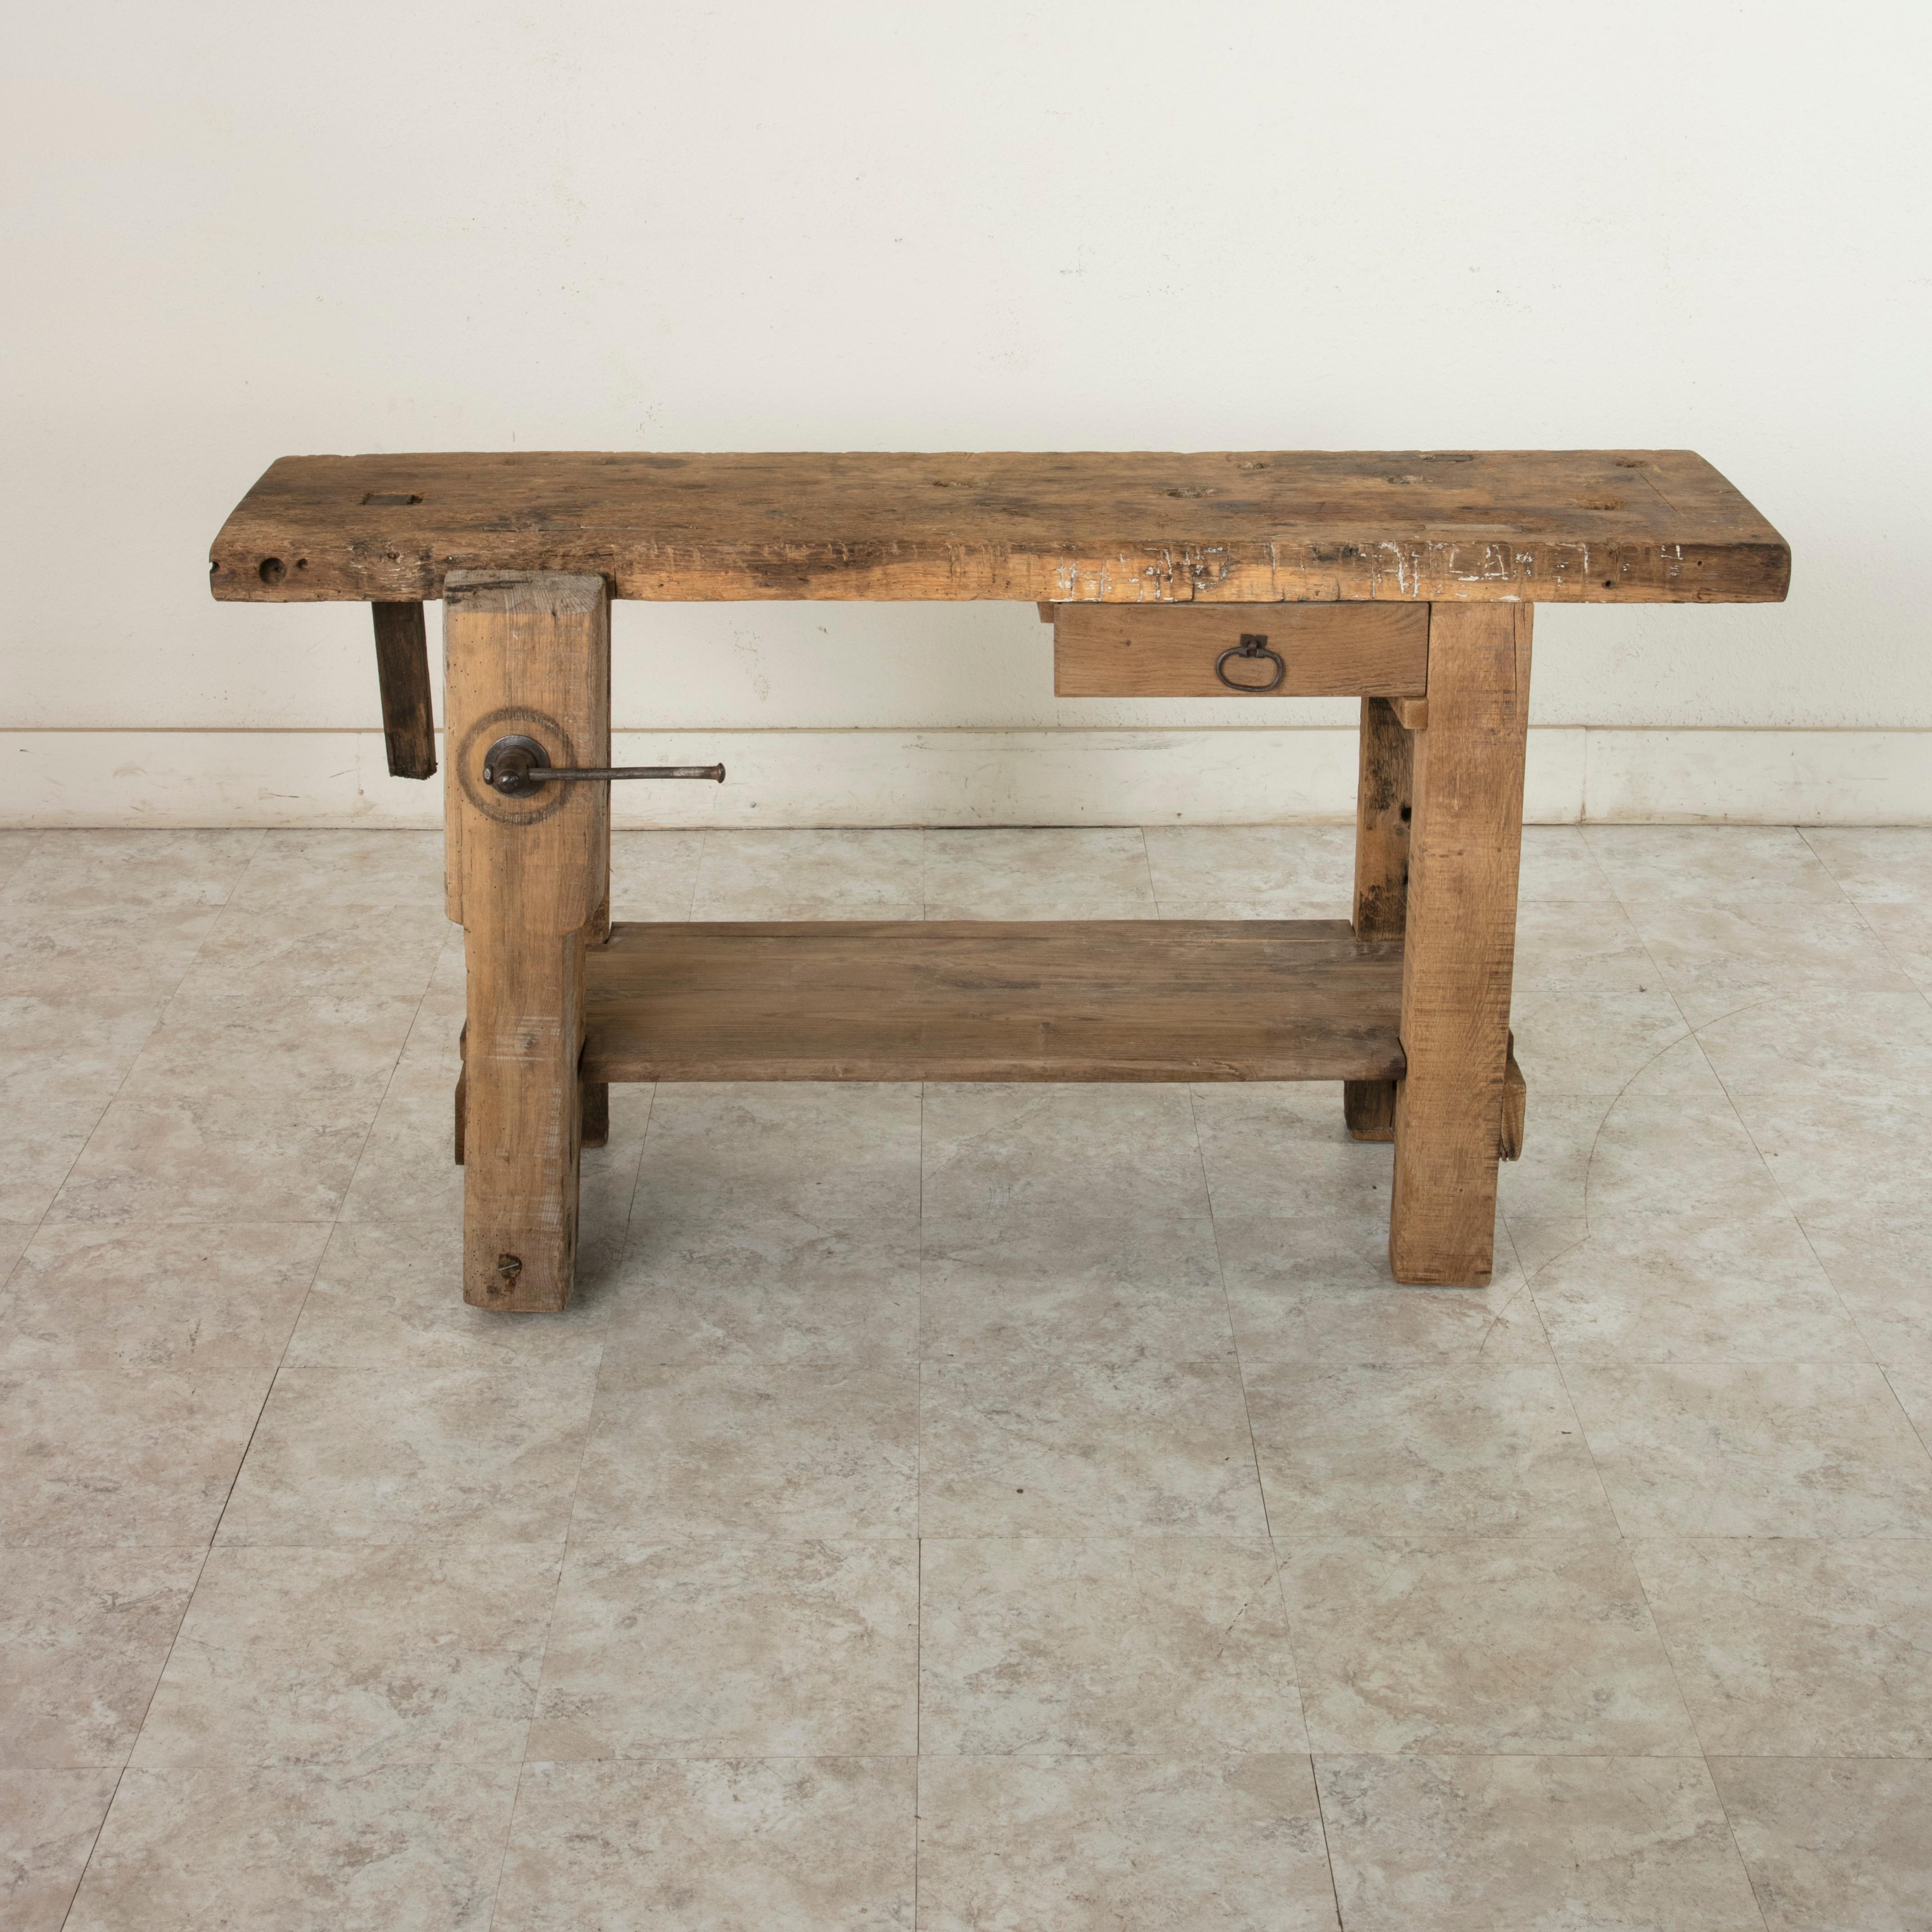 Rustic Late 19th Century French Stripped Oak Workbench, Console, Sofa Table with Vise